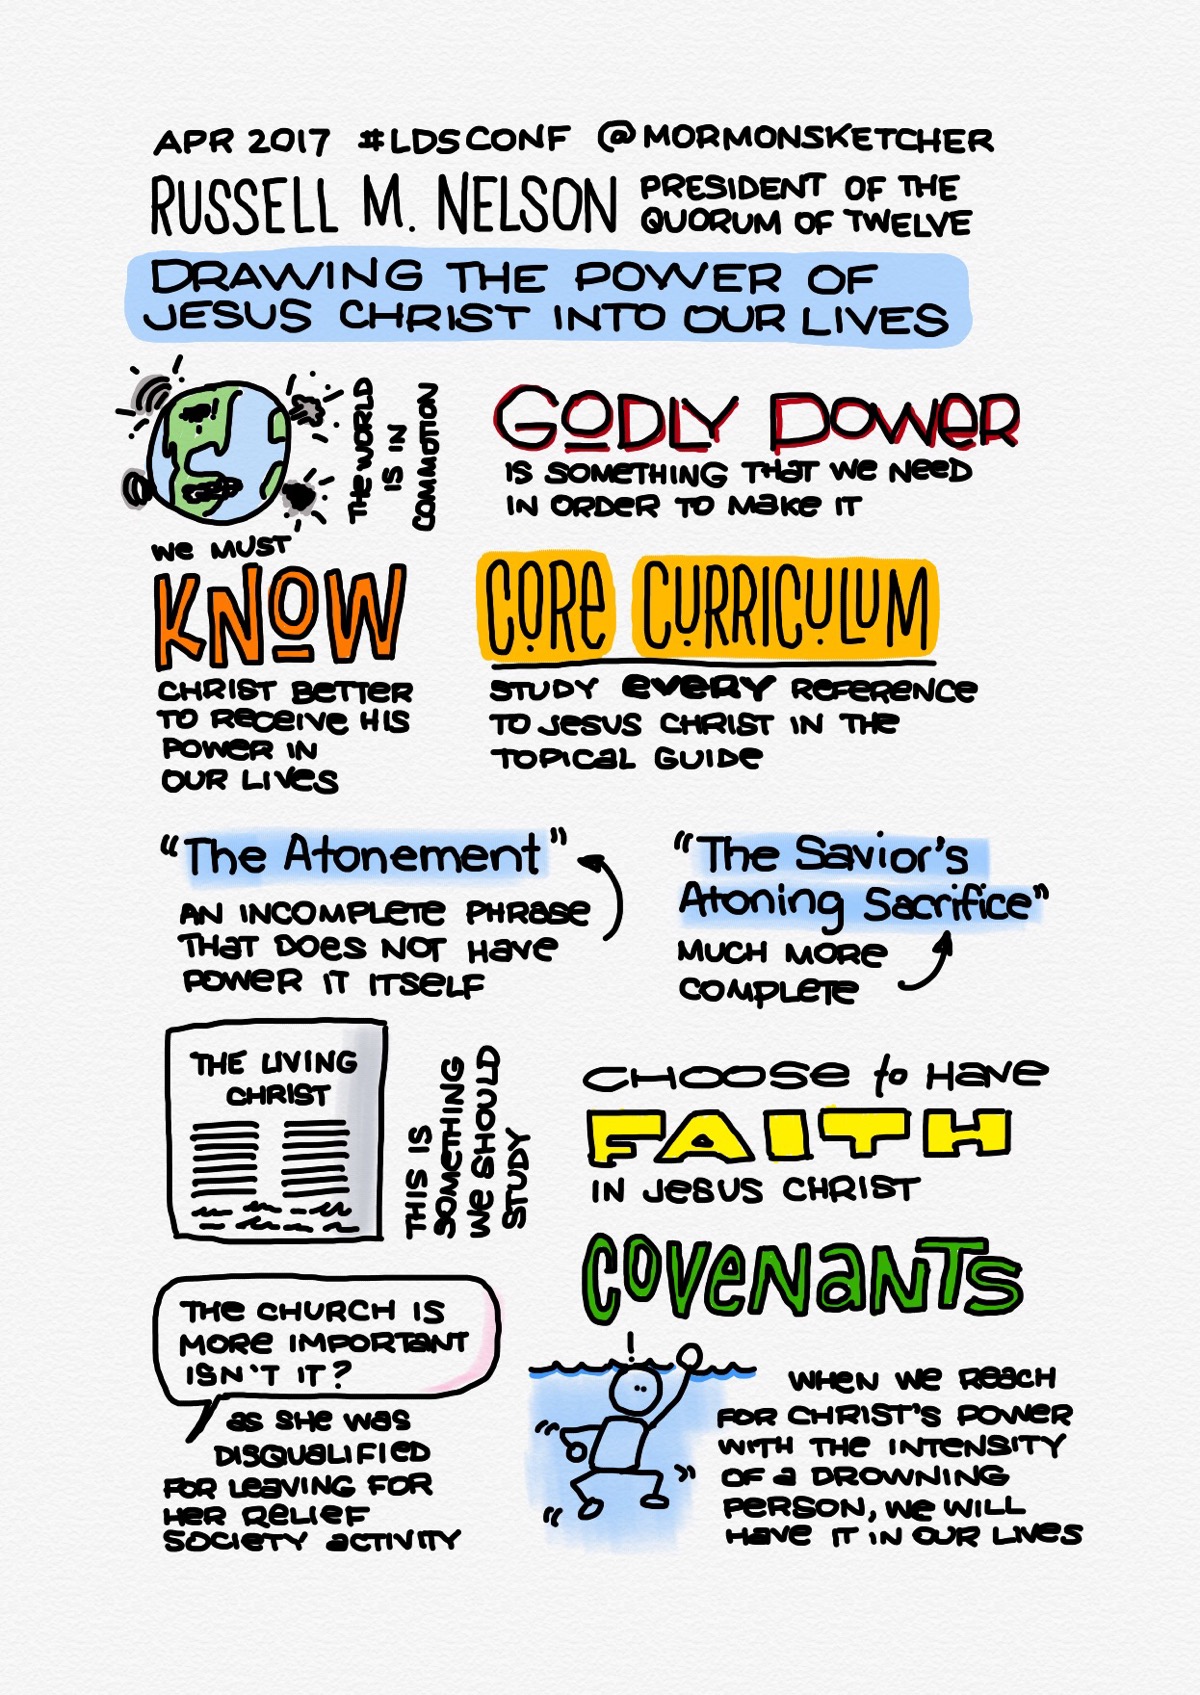 Russell M Nelson Conference Sketchnotes